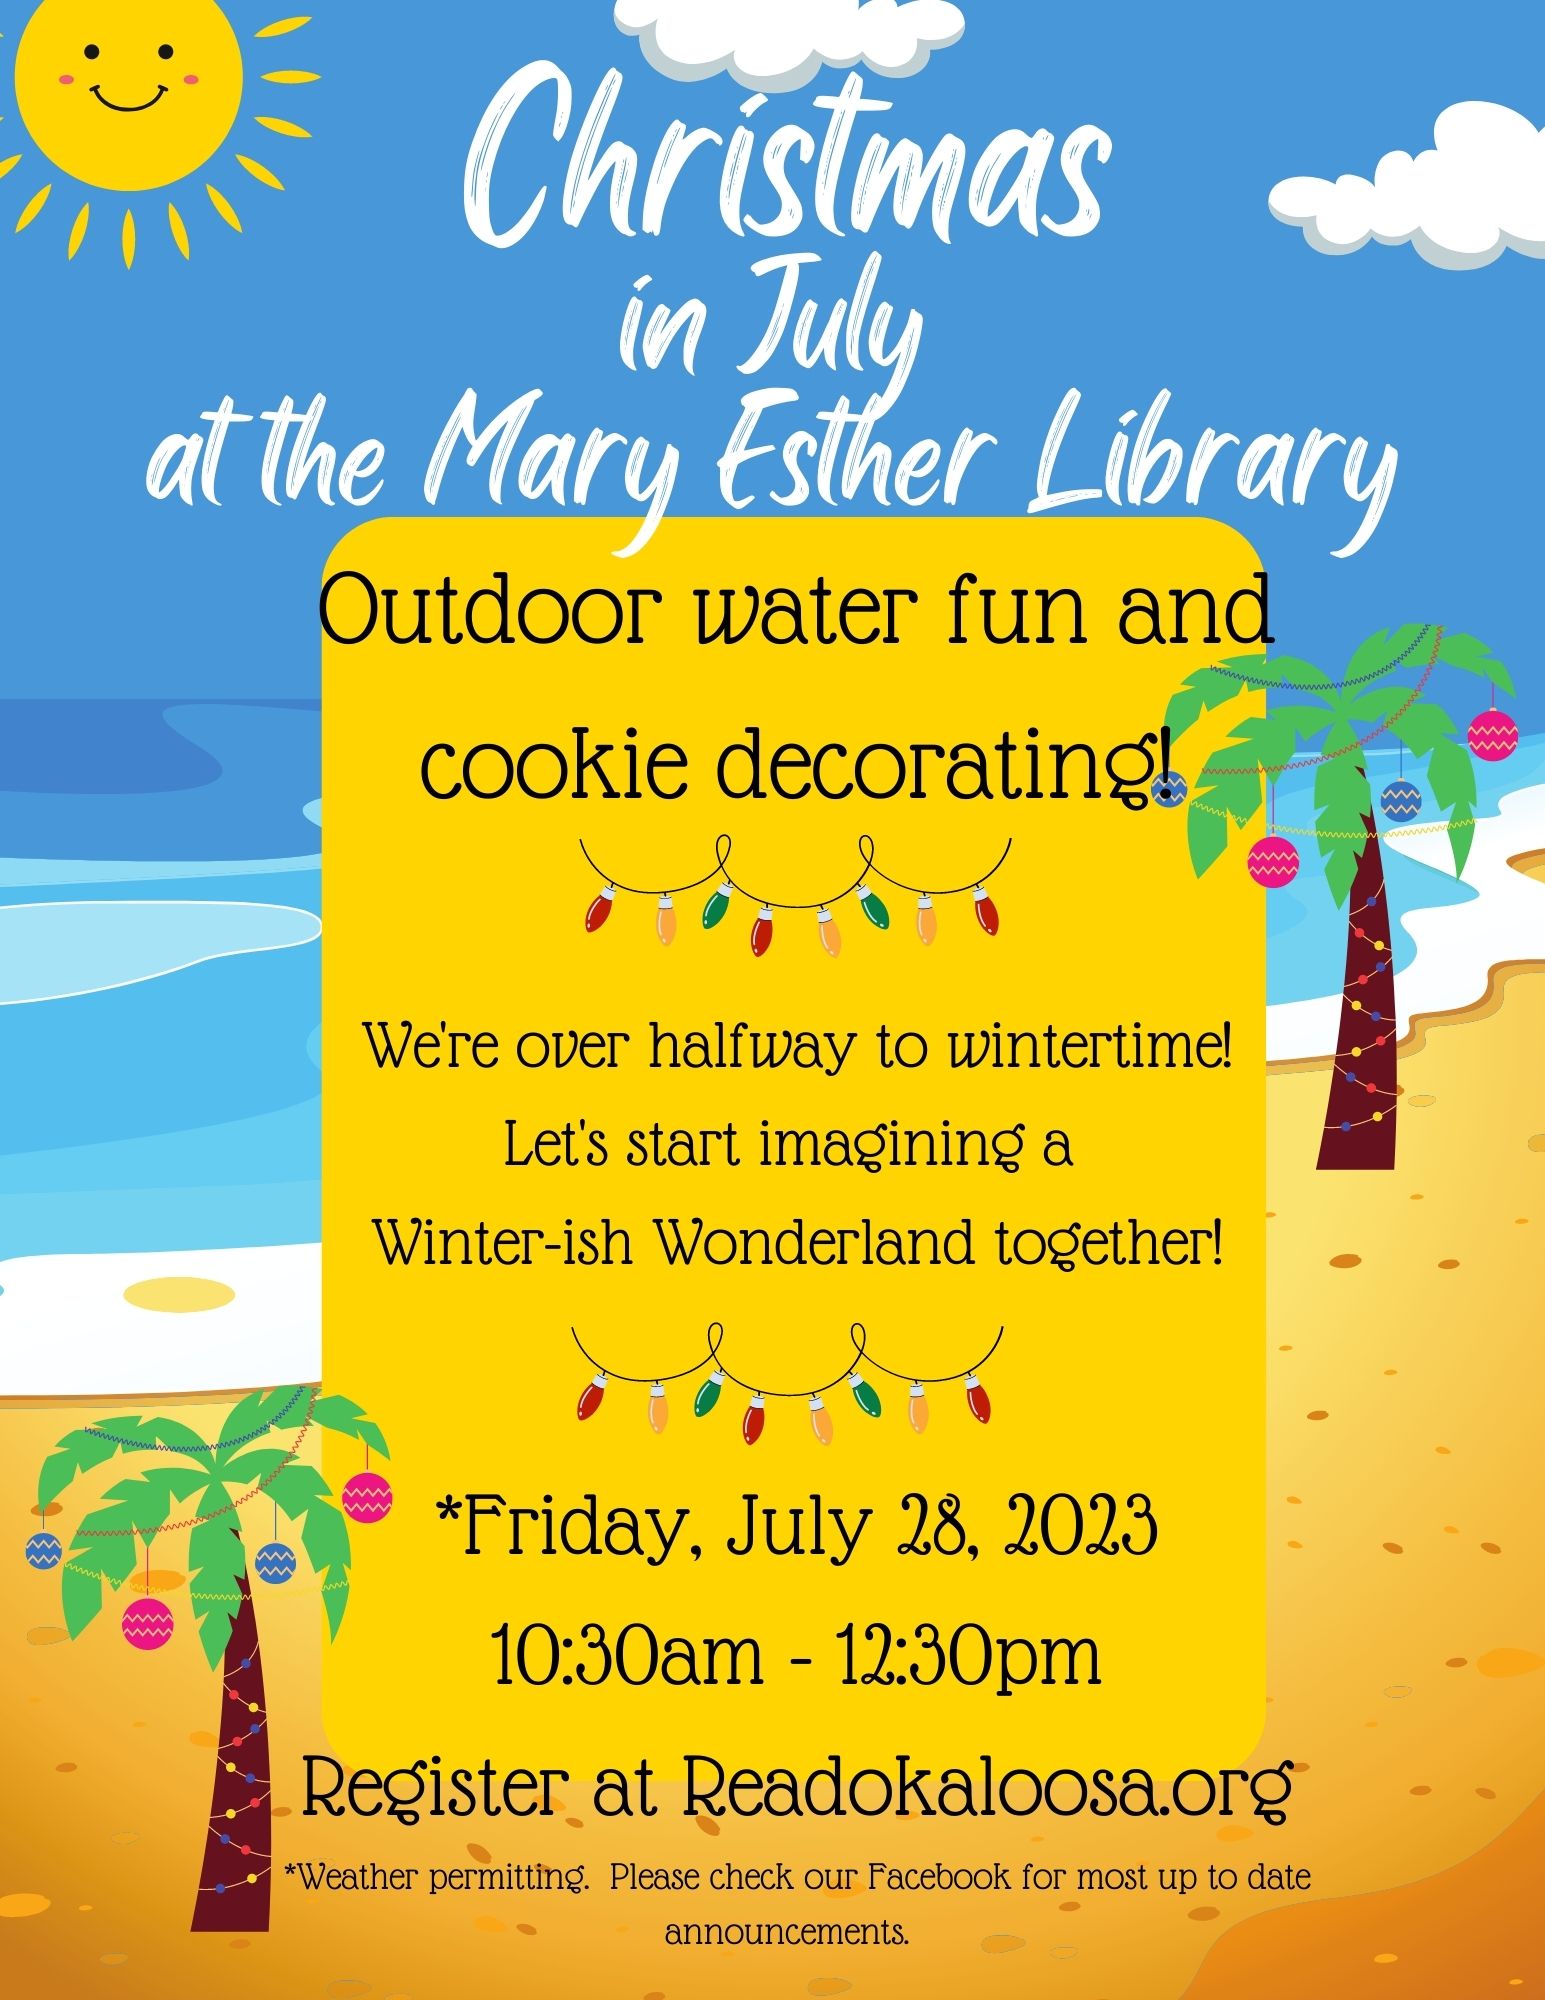 Christmas in July Party July 28 10:30am to 12:30pm